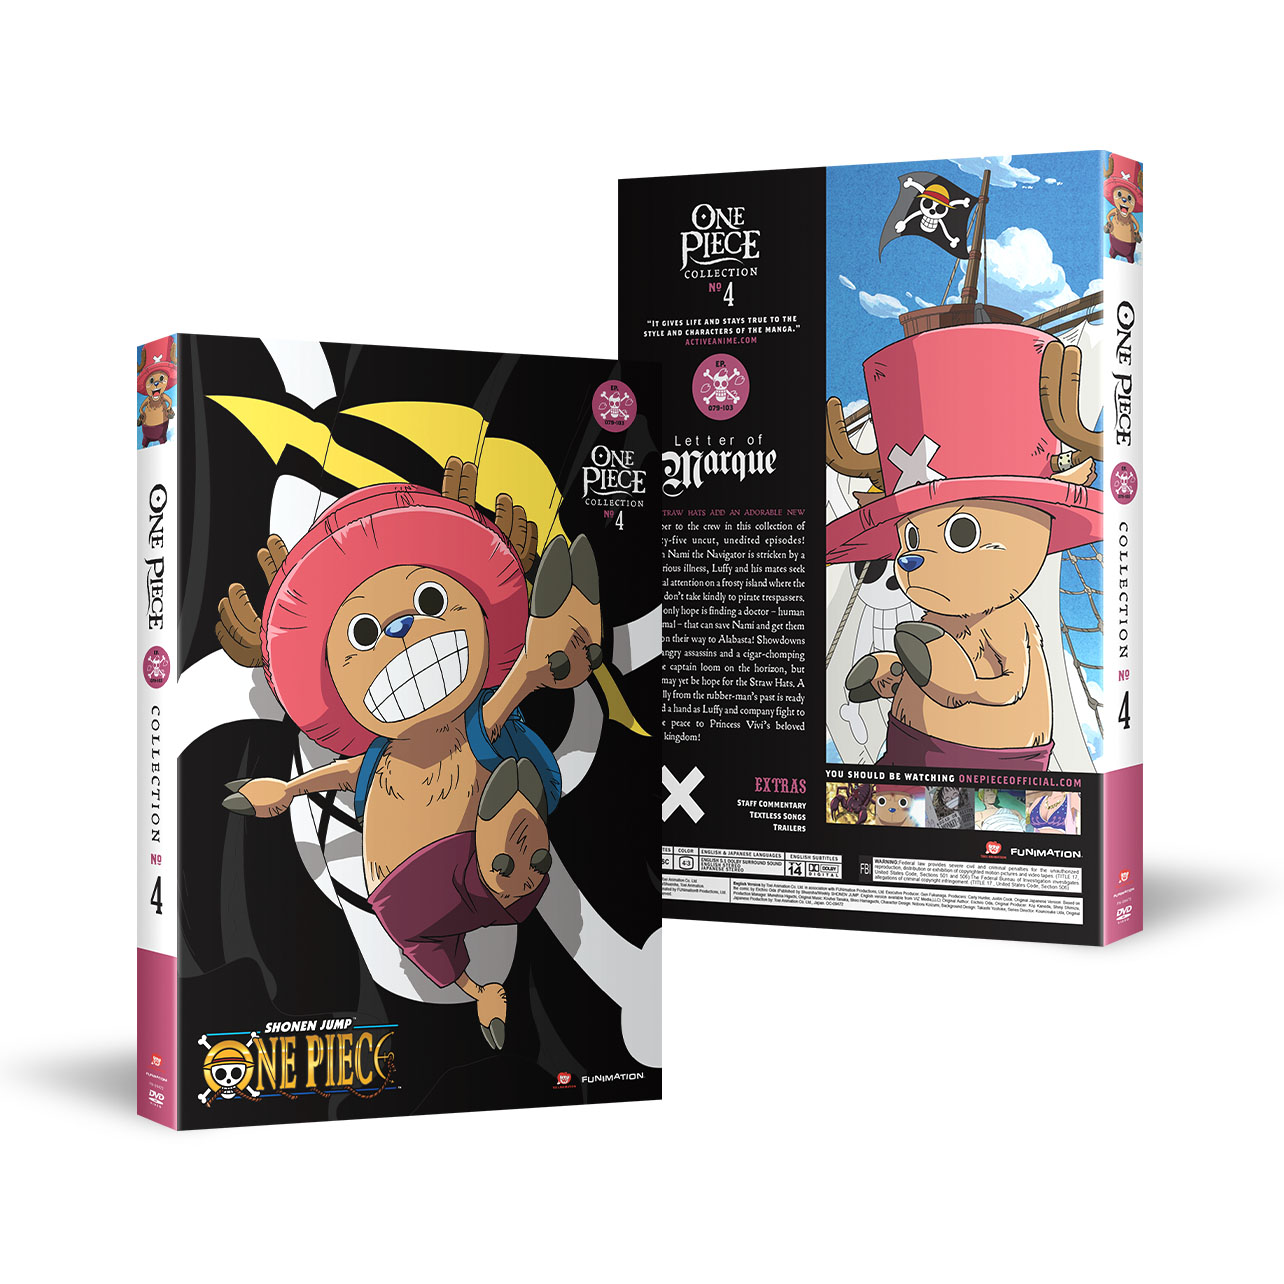 One Piece - Collection 4 - DVD image count 0